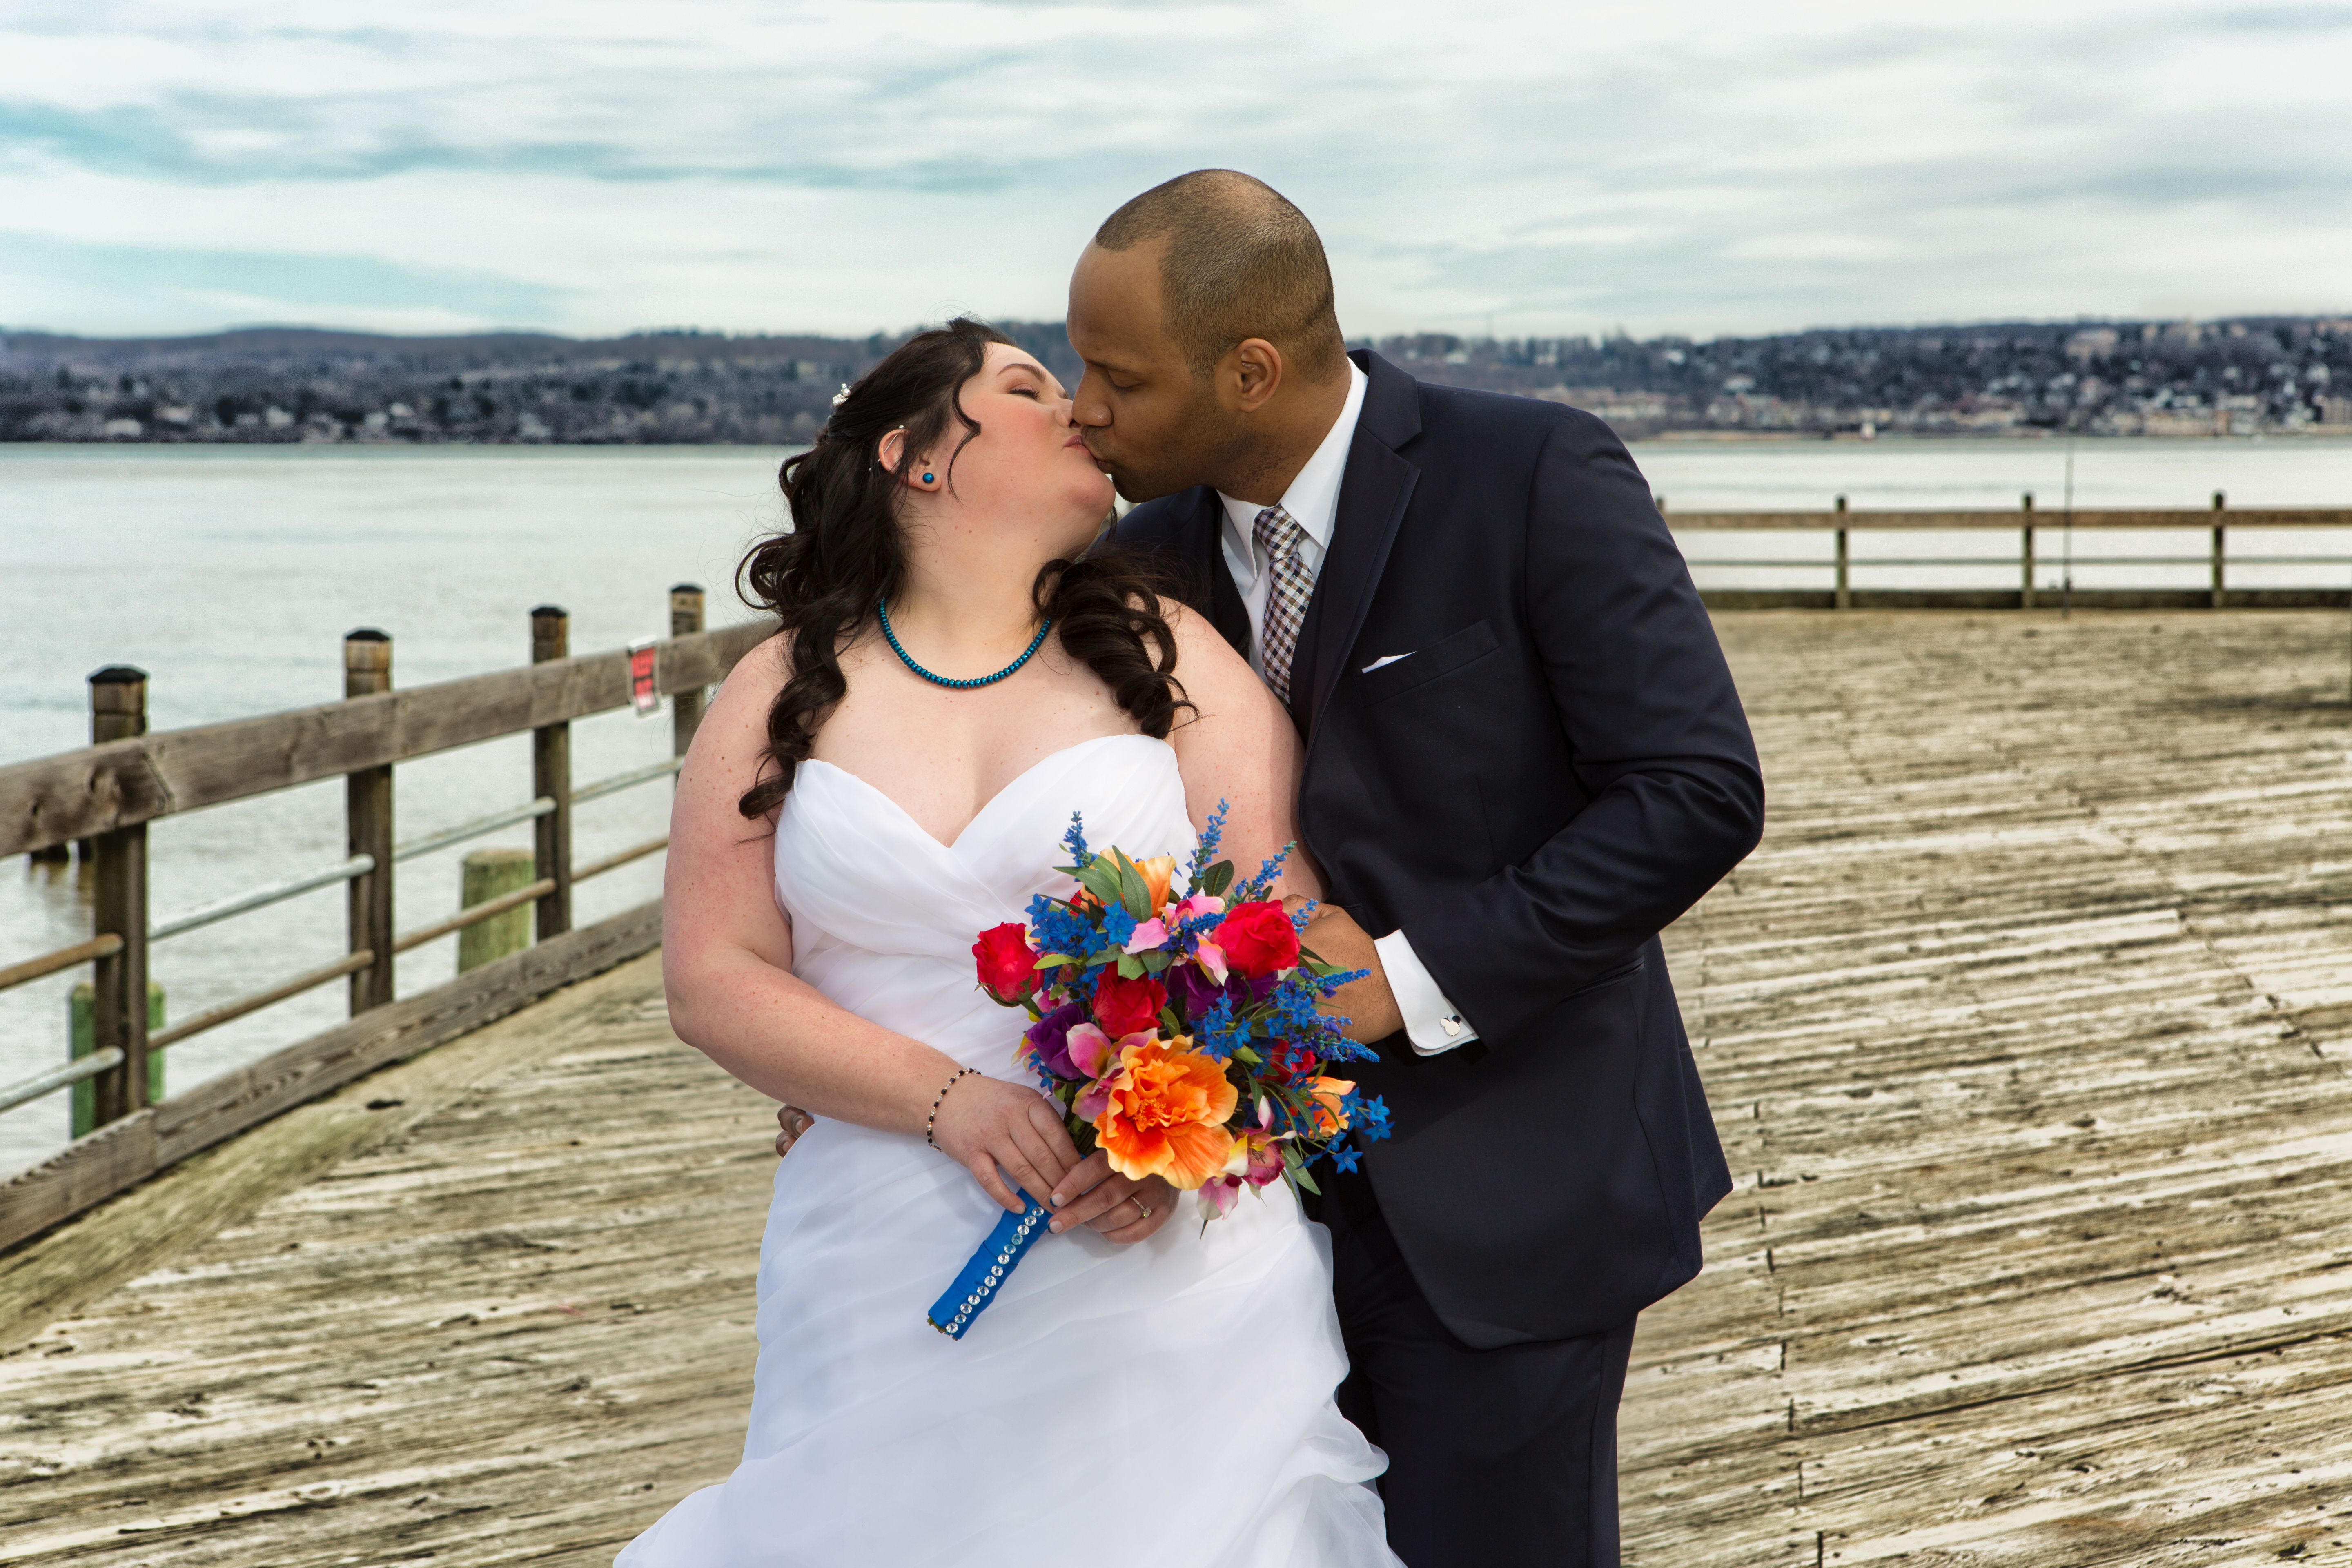 With Beautiful Spring Flowers in Hand, NY Bride Poses With Groom For Stunning Wedding Photos On the Water- The Nyack Seaport in Nyack, NY